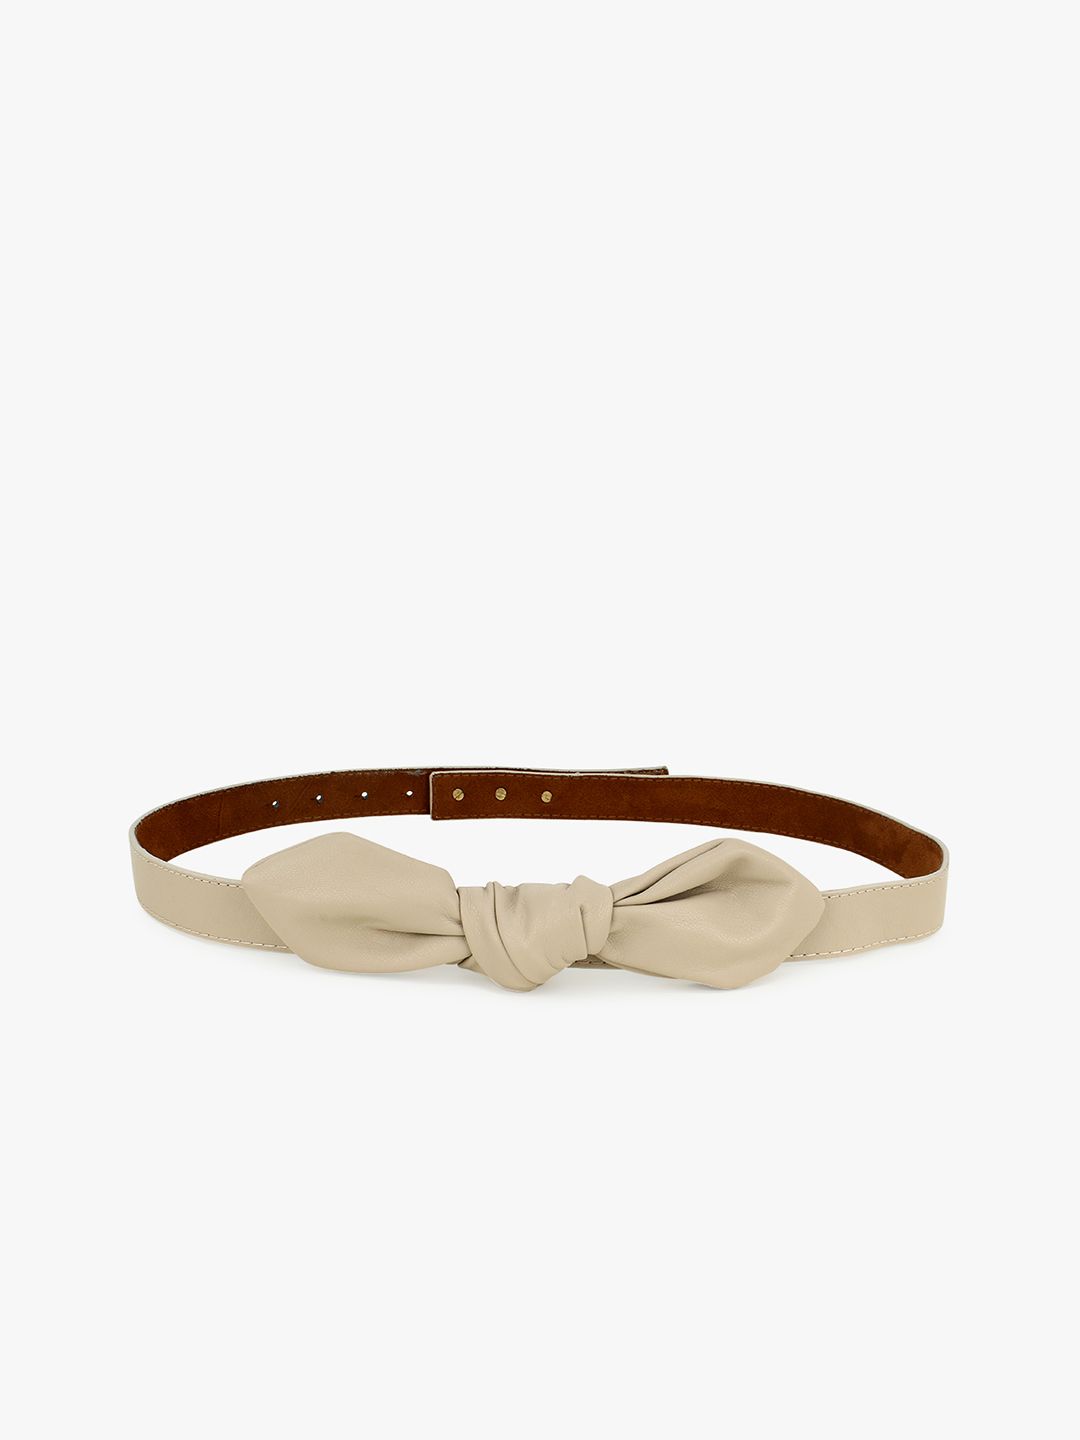 Mali Fionna Women Beige Solid Leather Belt Price in India